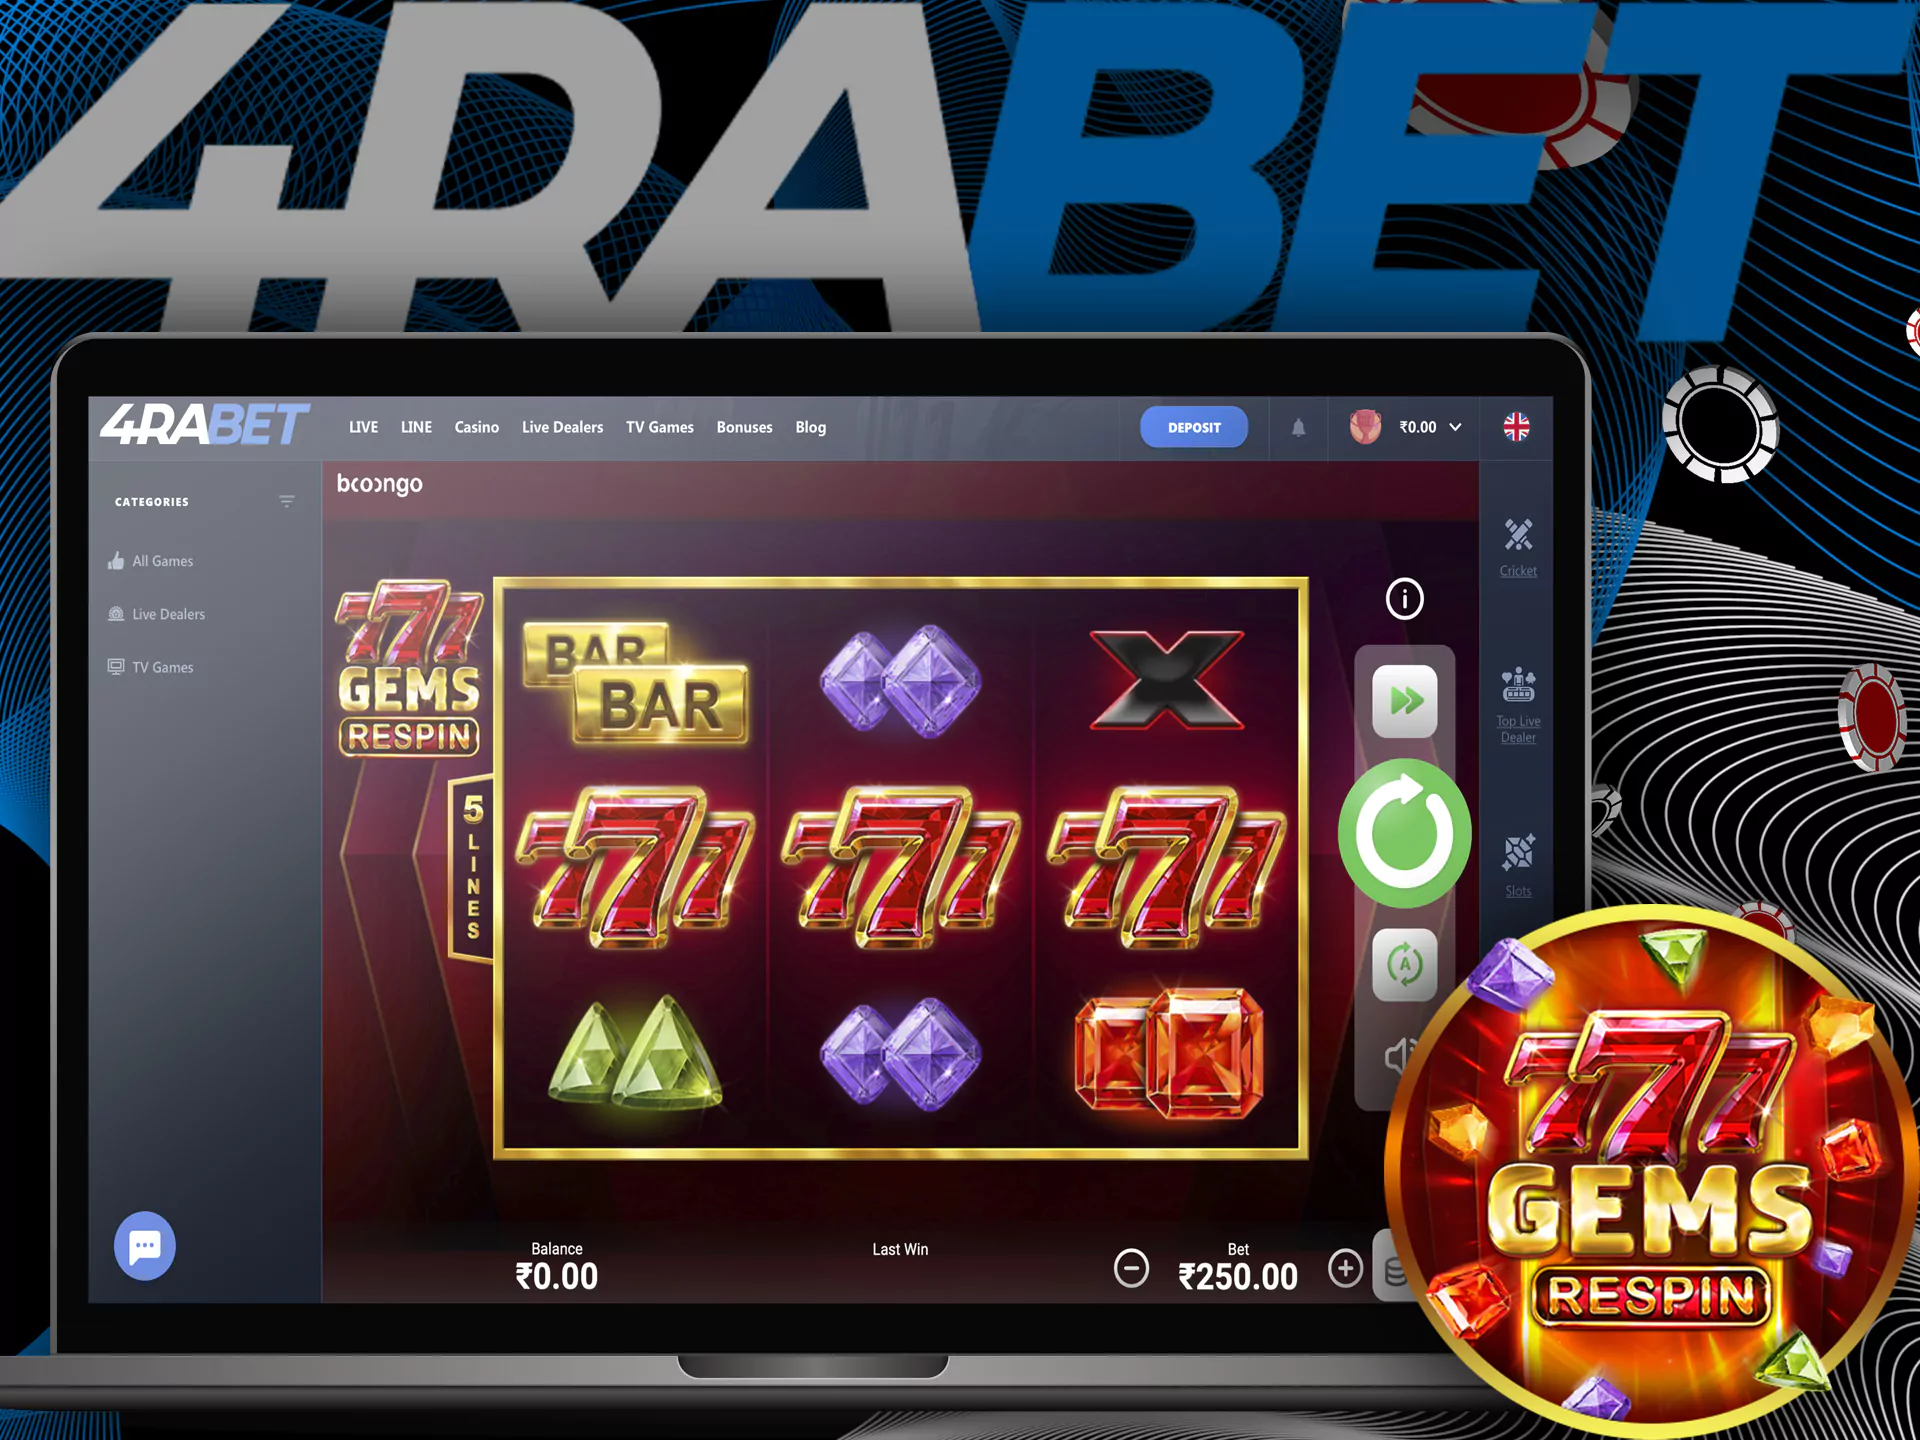 777 Gems Respin — one of the most best Casino game at 4rabet Bookie.